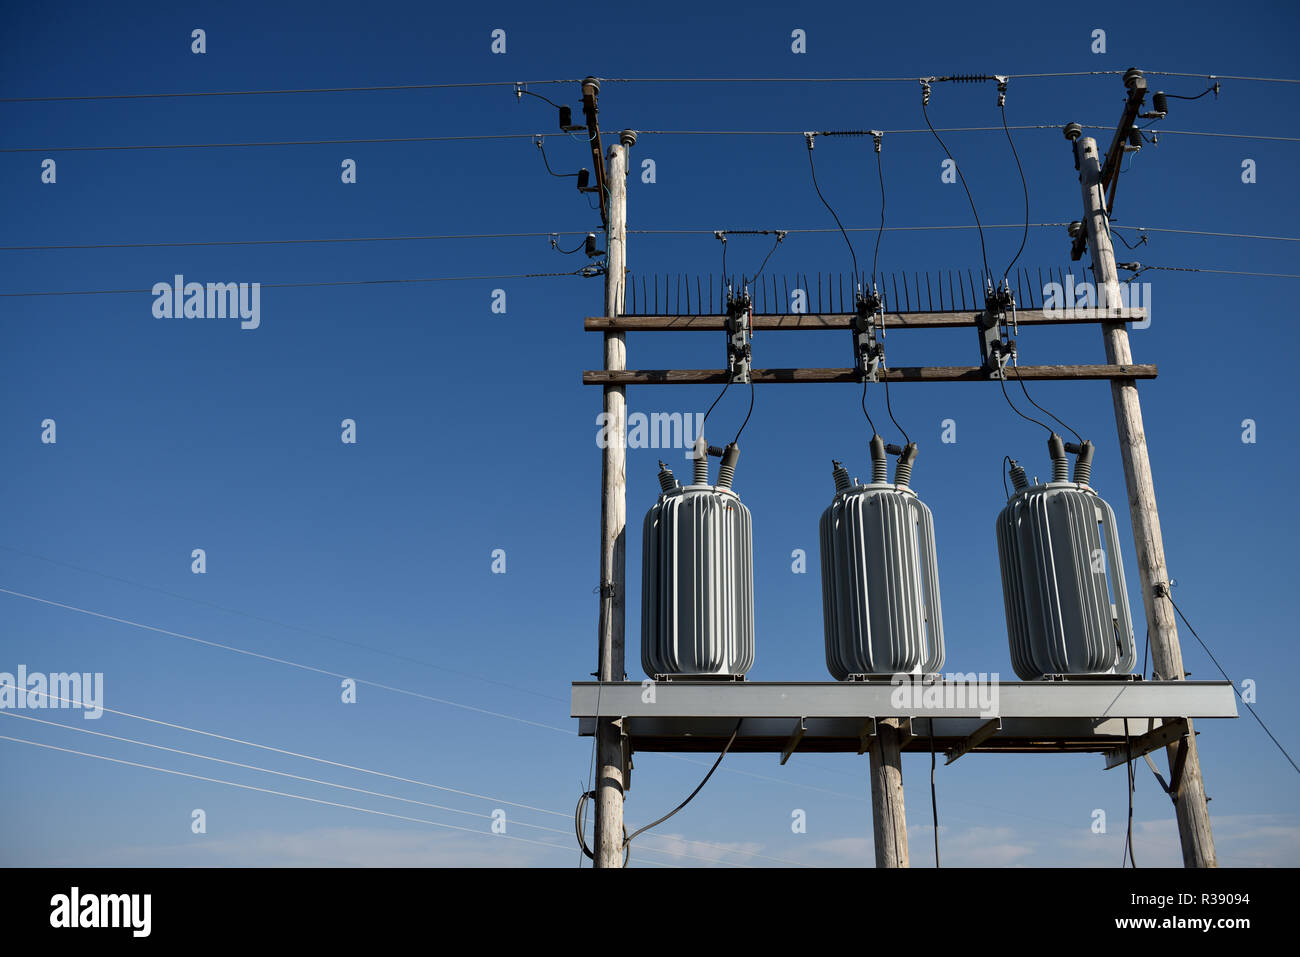 Electrical grid infrastructure, transformers, overhead high voltage power lines, against a blue sky in Wyoming / USA. Stock Photo